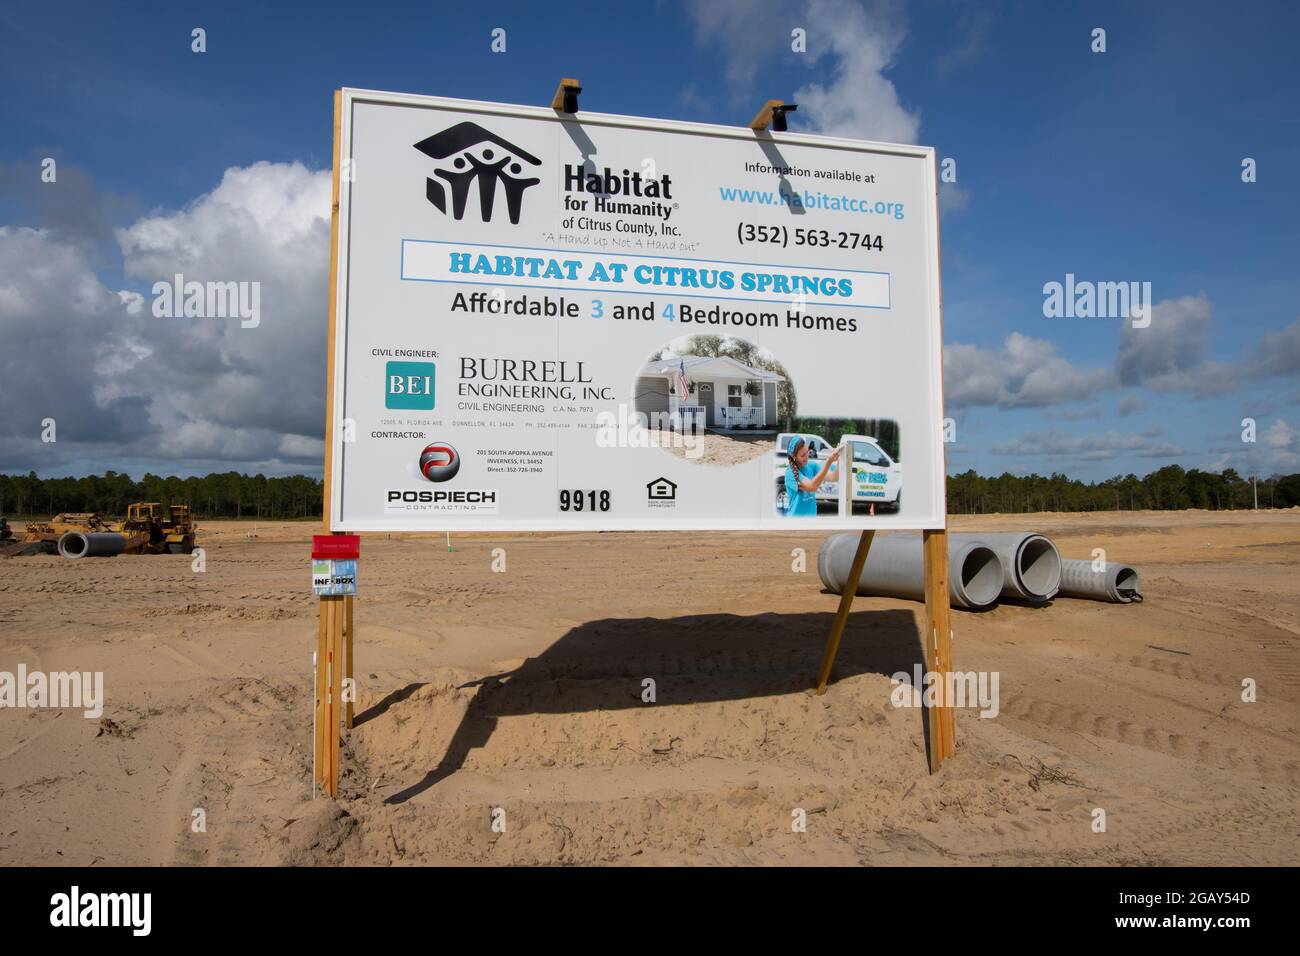 July 31, 2021, Citrus springs, FL:  Land being cleared for a large Habitat For Humanity housing development. Stock Photo